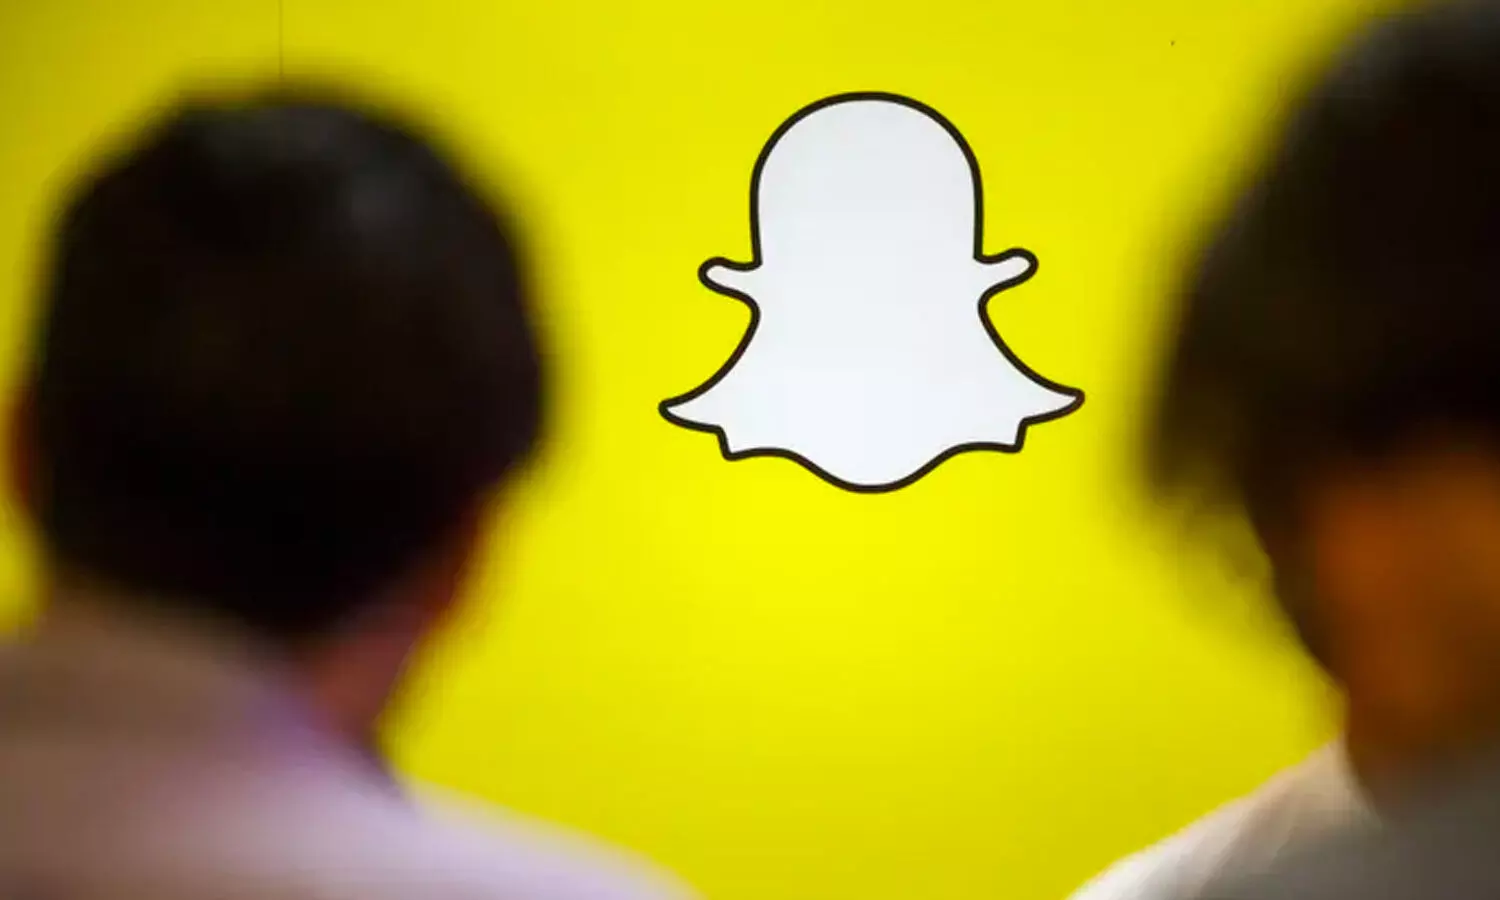 Snap layoffs to reduce 10% of its employees in fresh job cuts